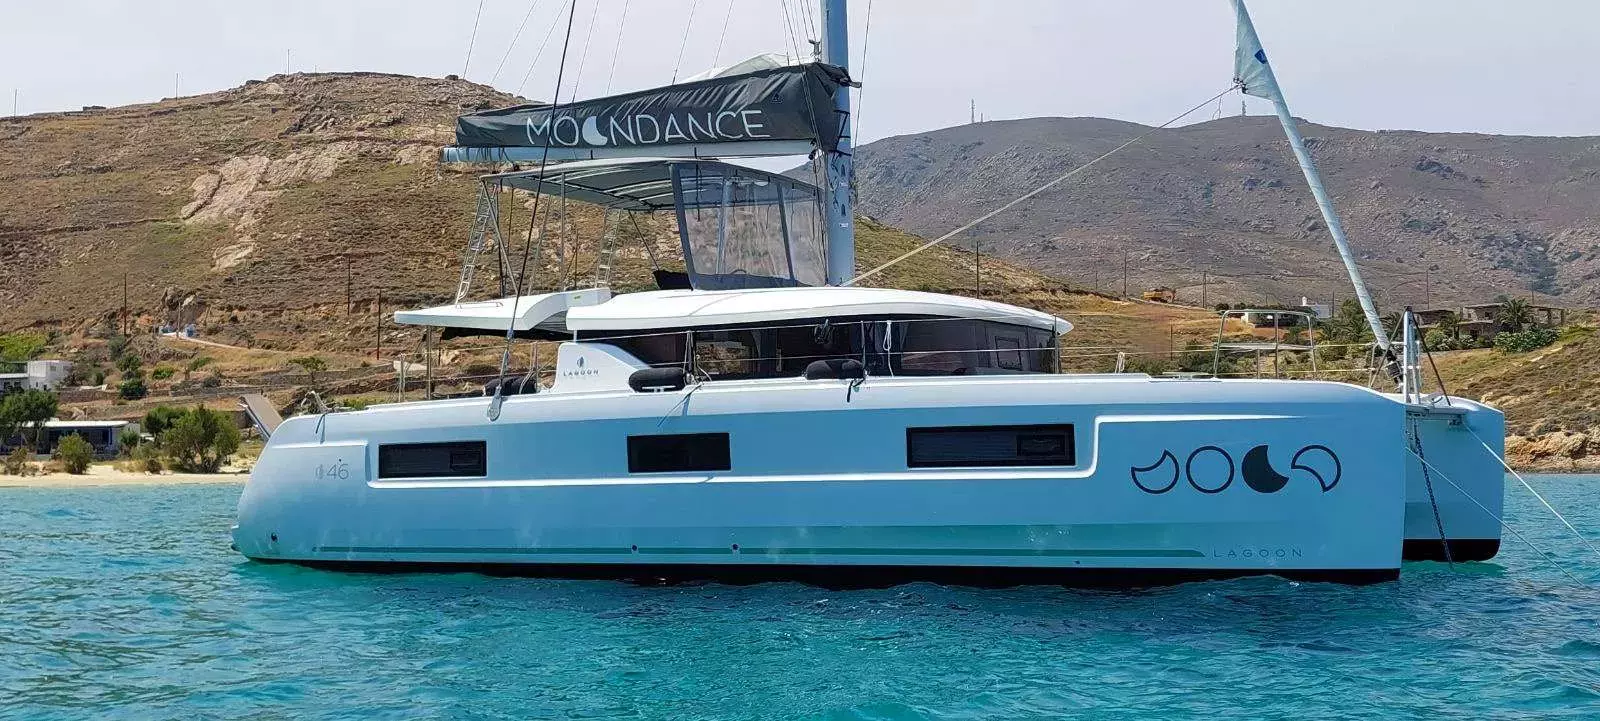 Moondance III by Lagoon - Special Offer for a private Power Catamaran Rental in Santorini with a crew